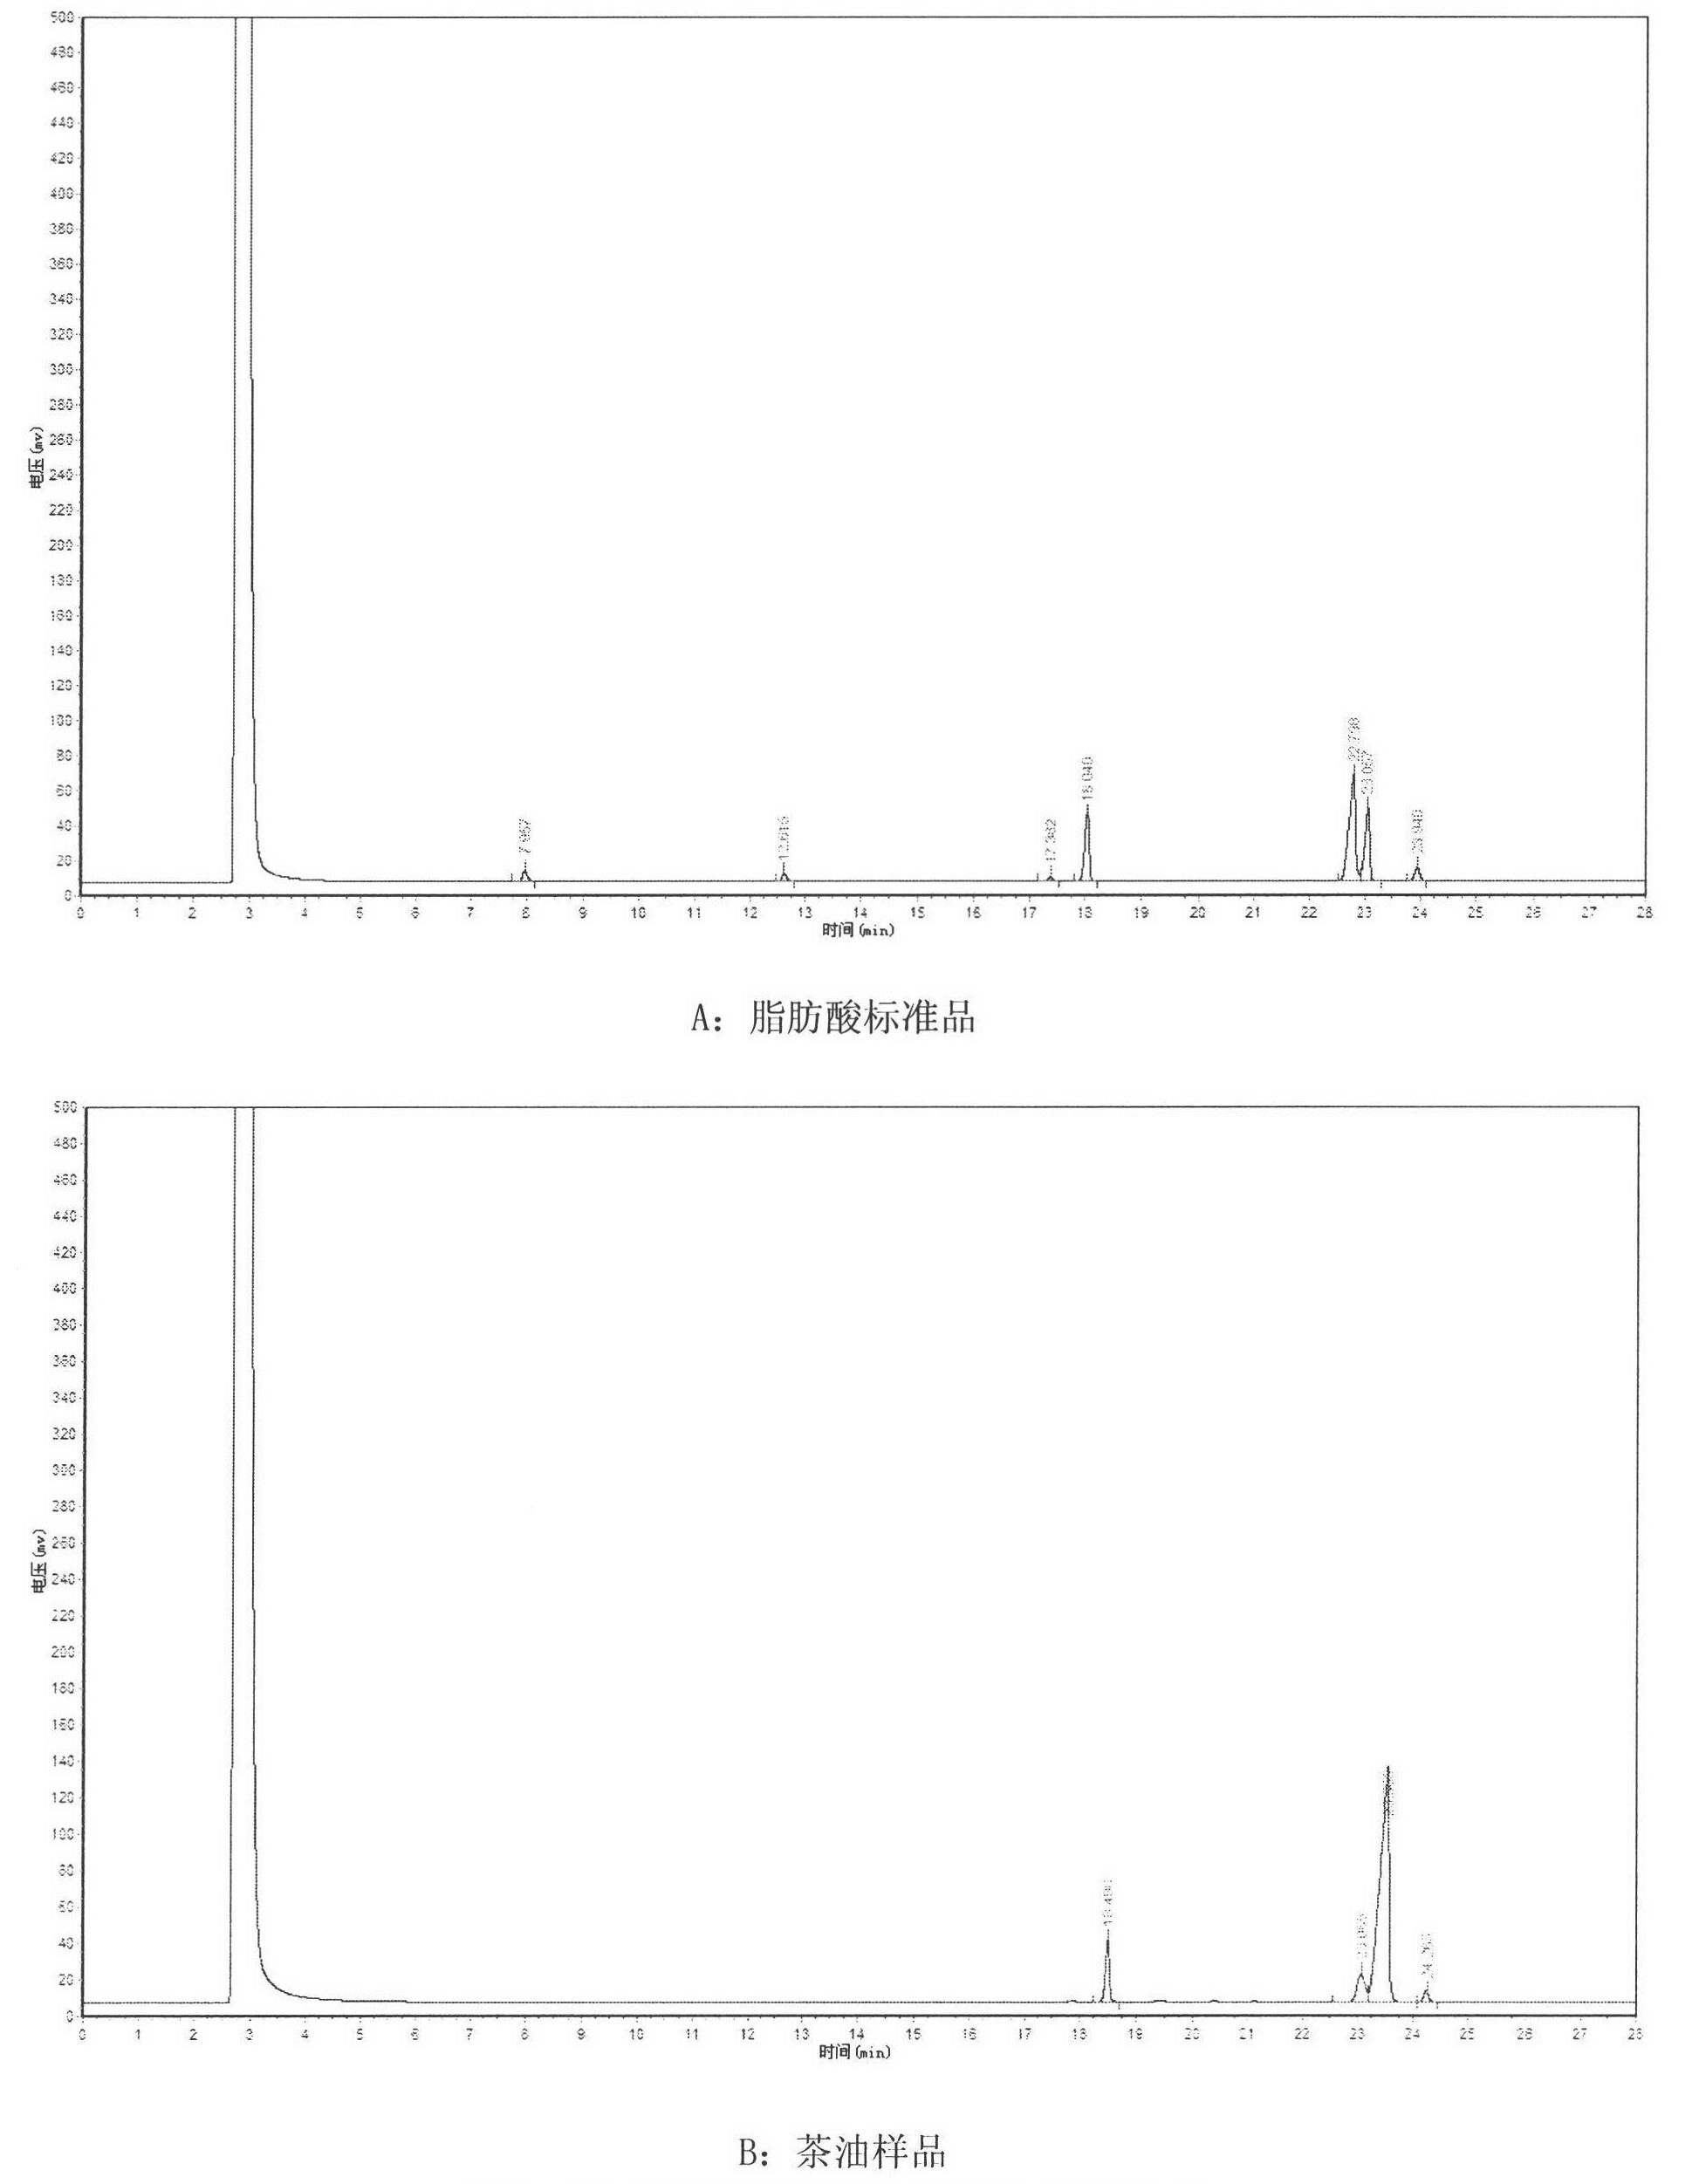 Method for rapid detection and authenticity identification of fatty acid of racy camellia oil by near infrared transmission spectroscopy (NITS)